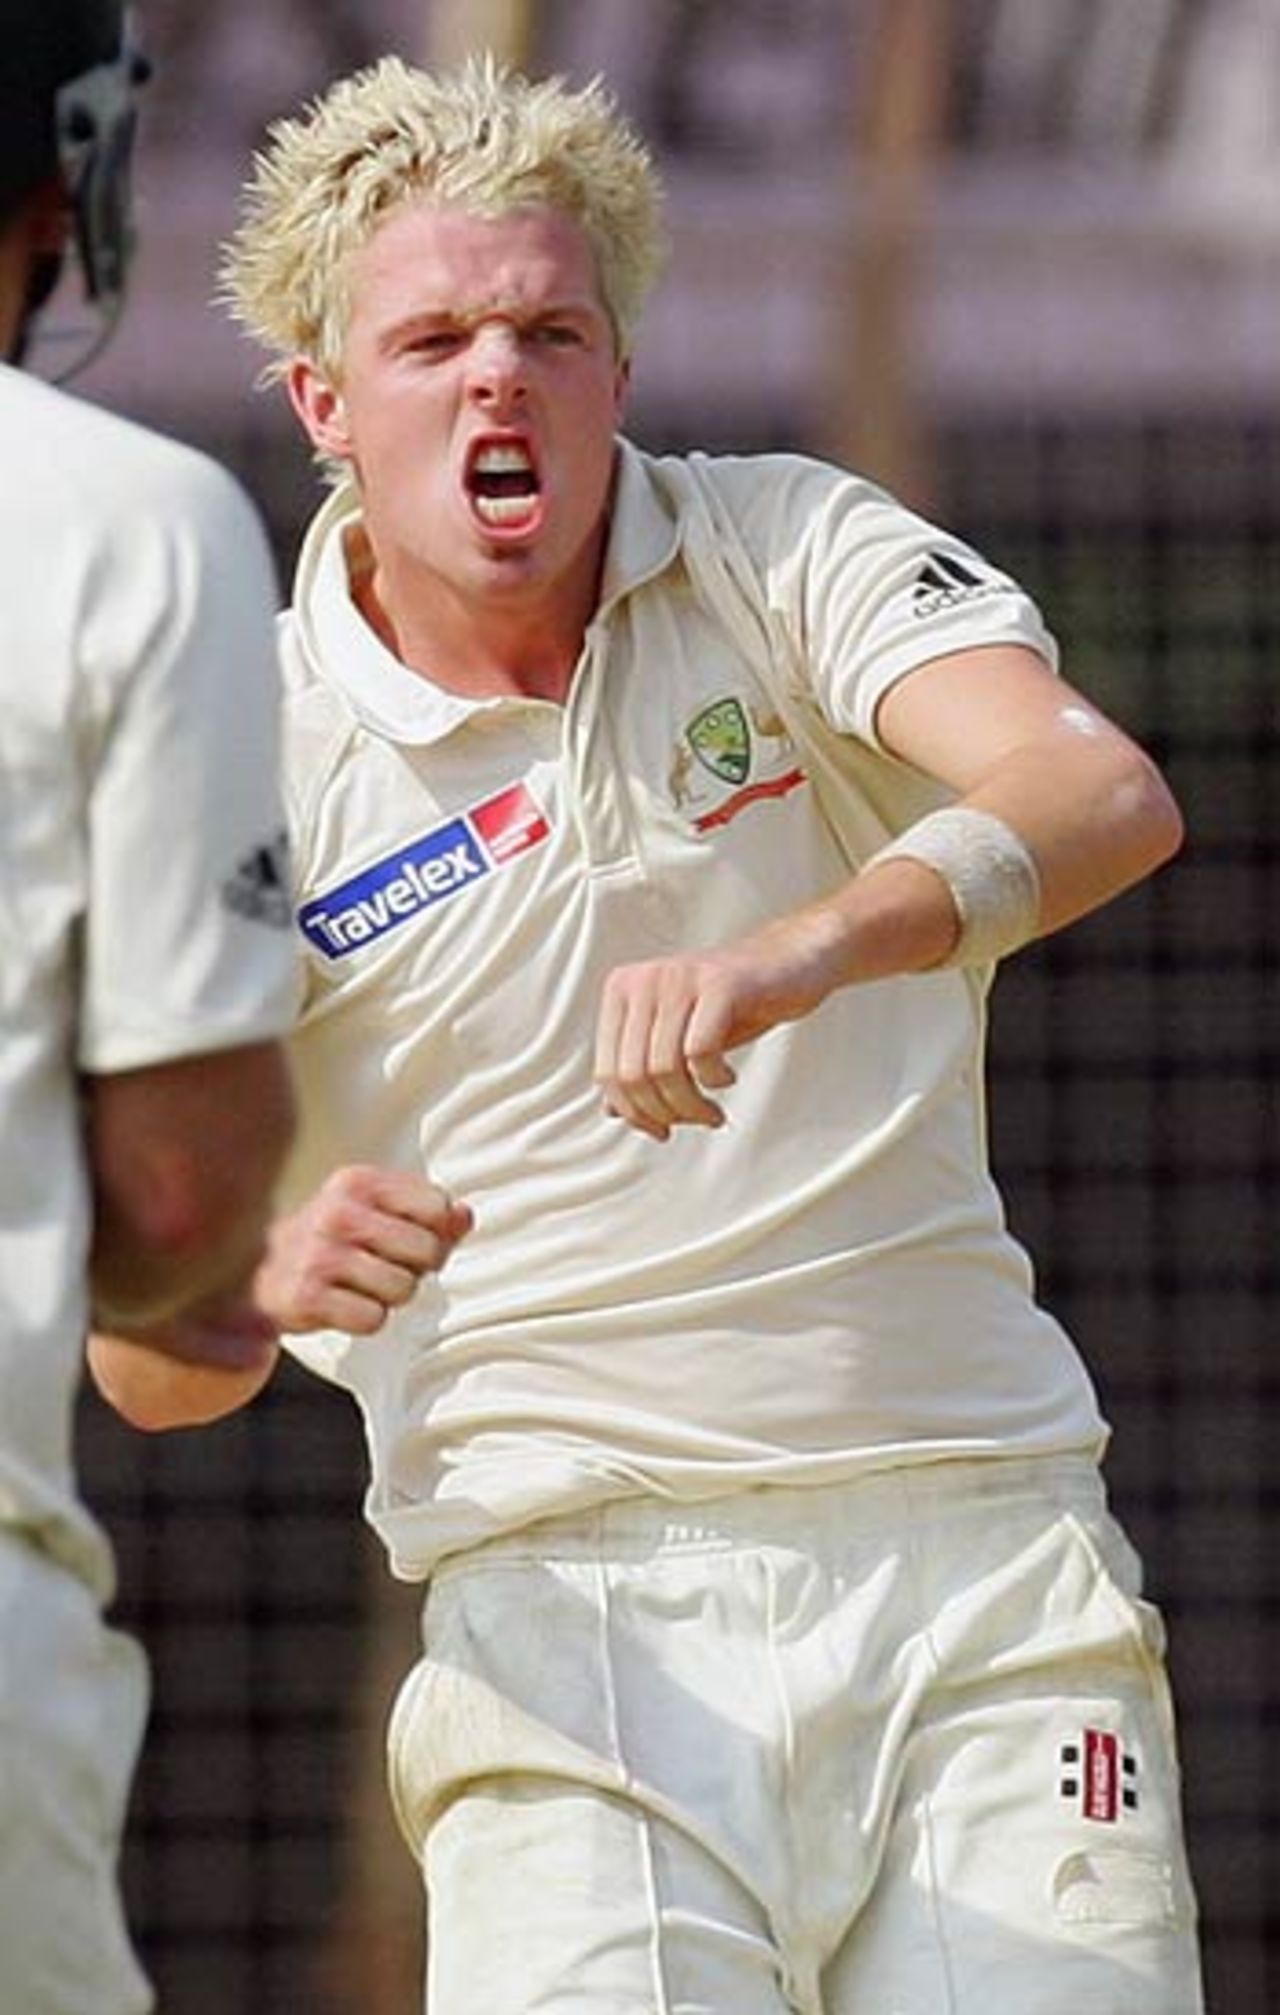 Dan Cullen celebrates his first Test wicket, Bangladesh v Australia, 2nd Test, Chittagong, 1st day, April 16, 2006